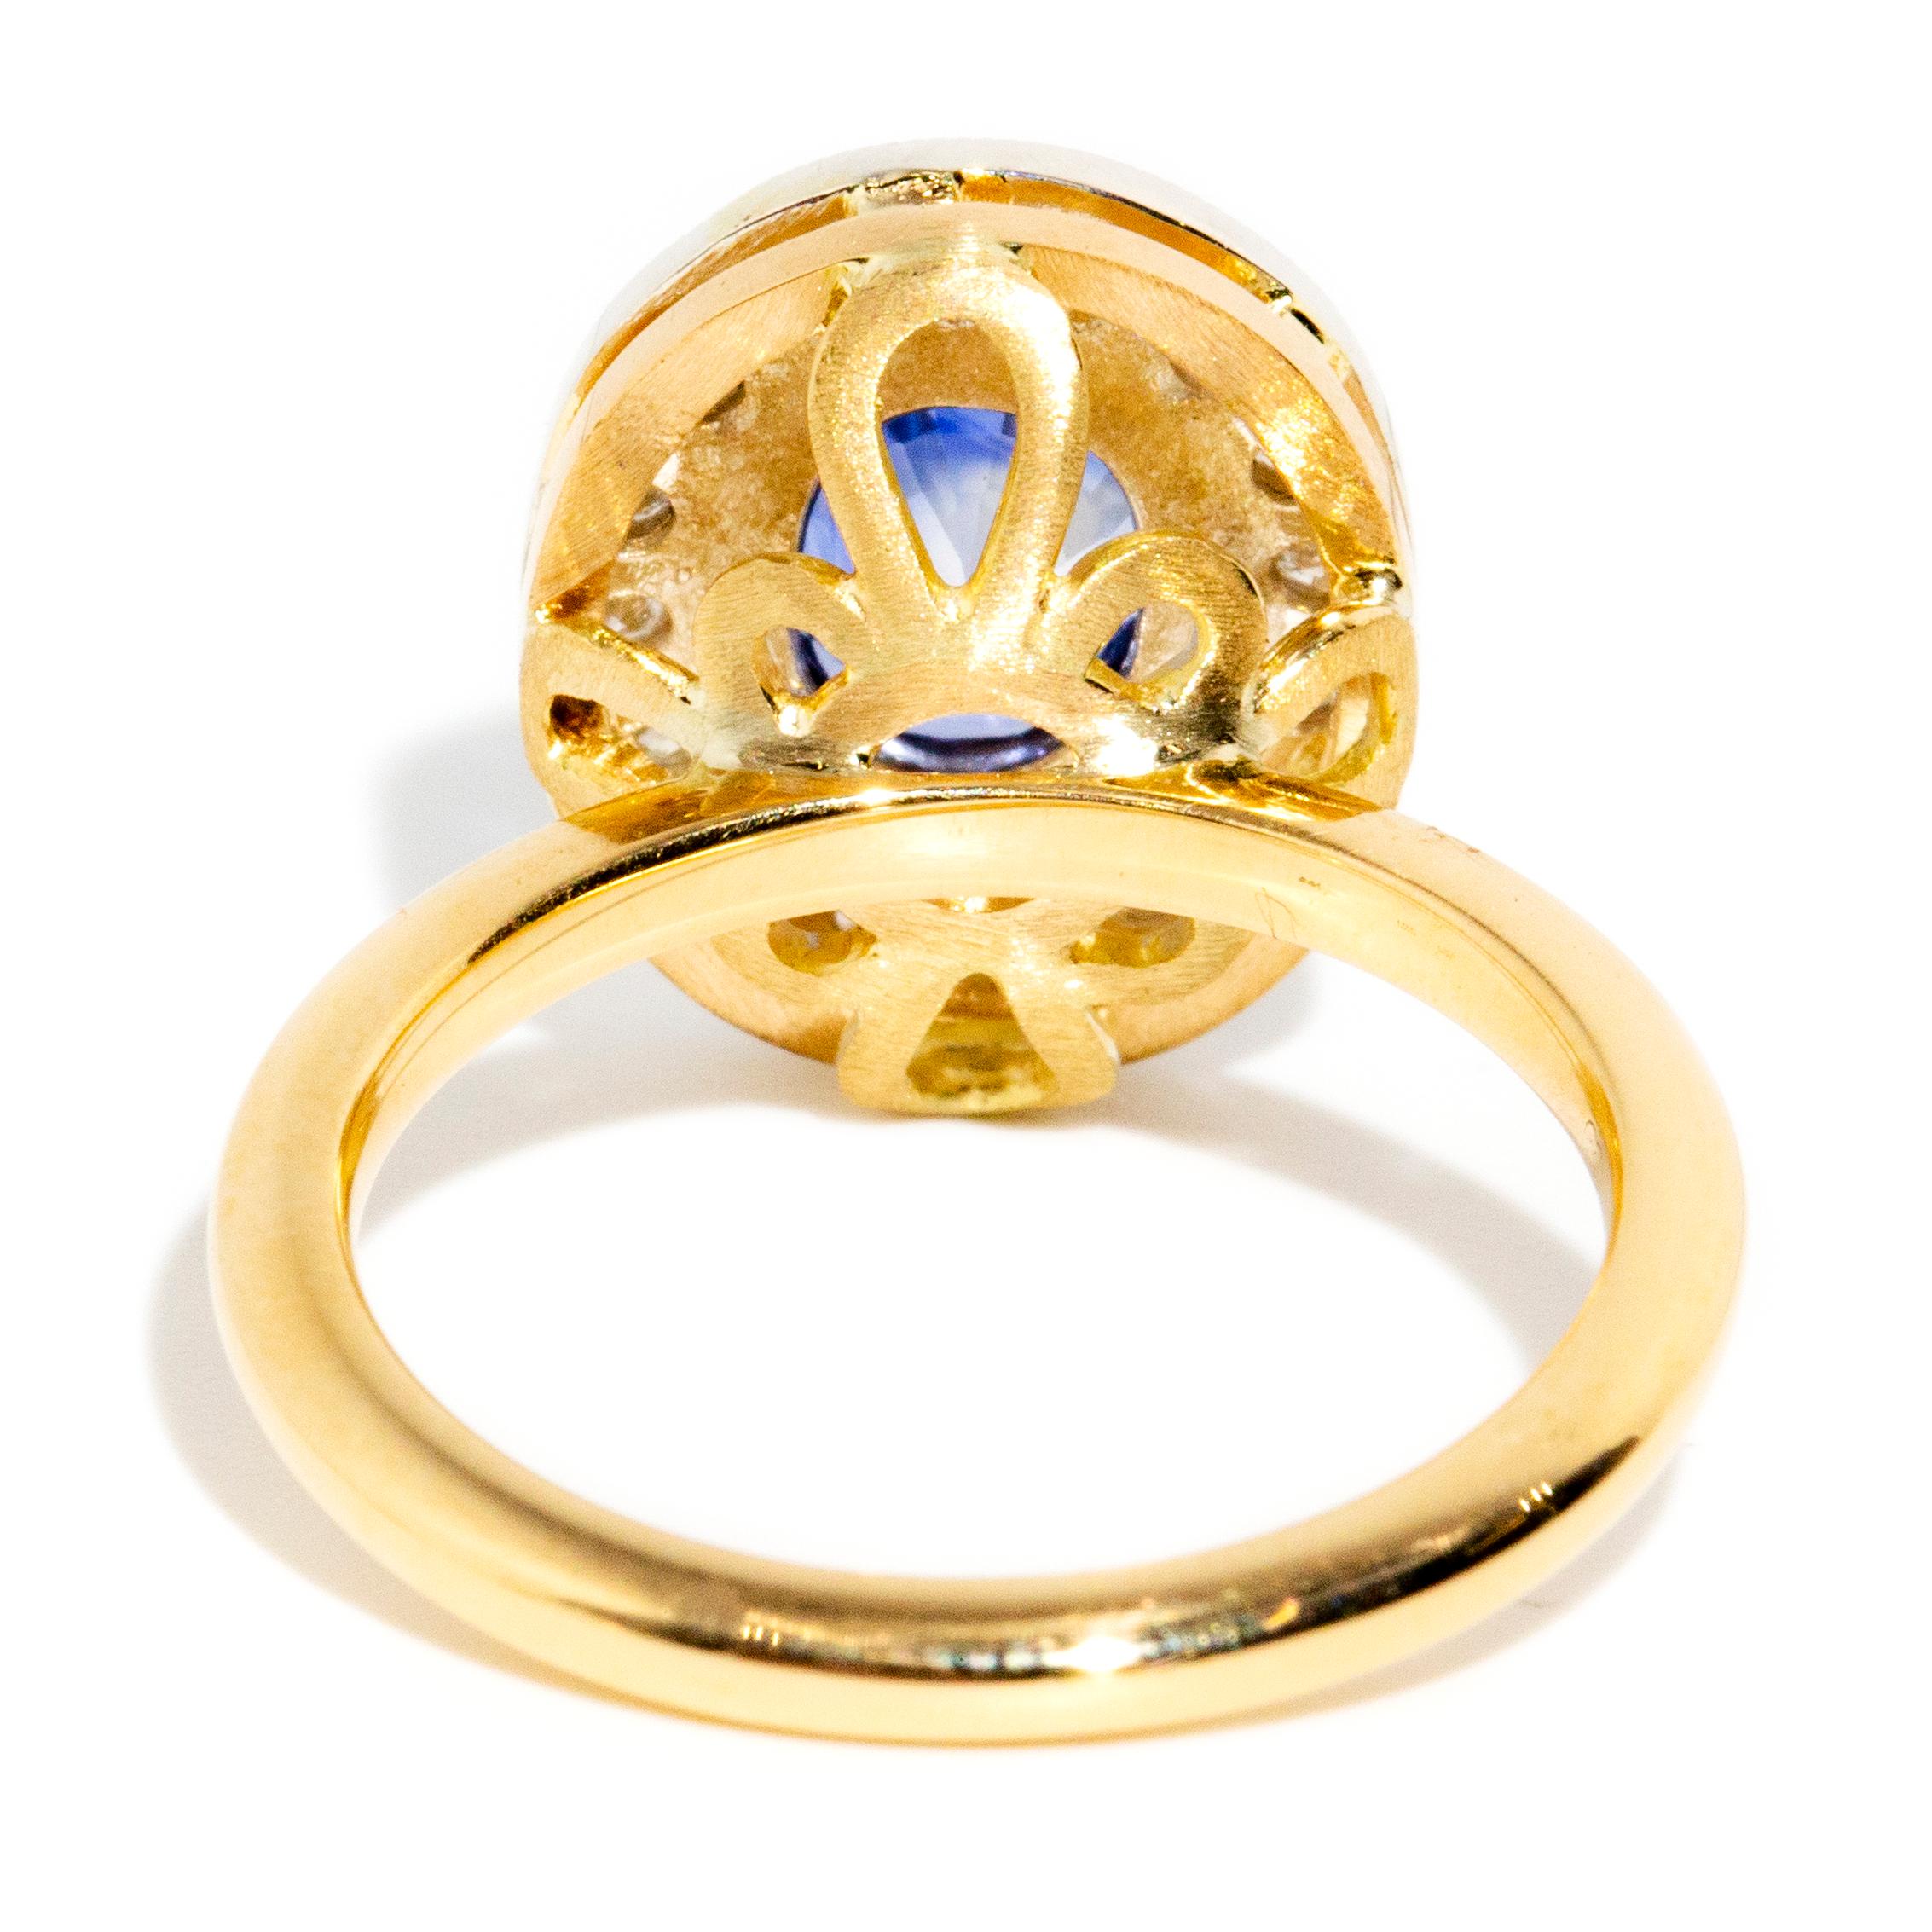 Reinvented Vintage Circa 1980s Sapphire & Diamond Halo Ring 18 Carat Yellow Gold For Sale 1